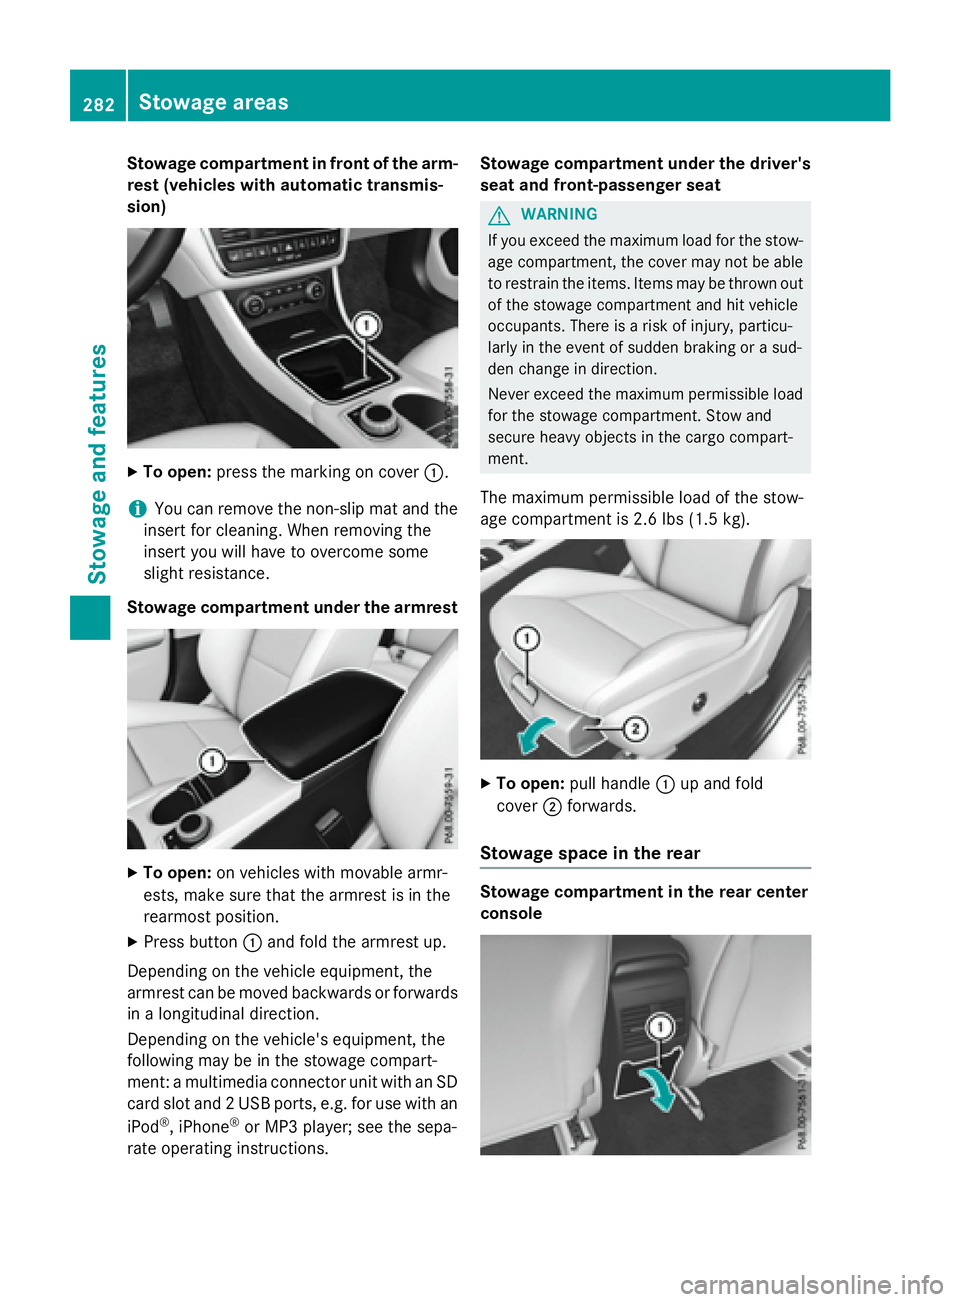 MERCEDES-BENZ GLA 2016  Owners Manual Stowage compartment in front of the arm-
rest (vehicles with automatic transmis-
sion) X
To open: press the marking on cover �C .
i You can remove the non-slip mat and the
insert for cleaning. When re